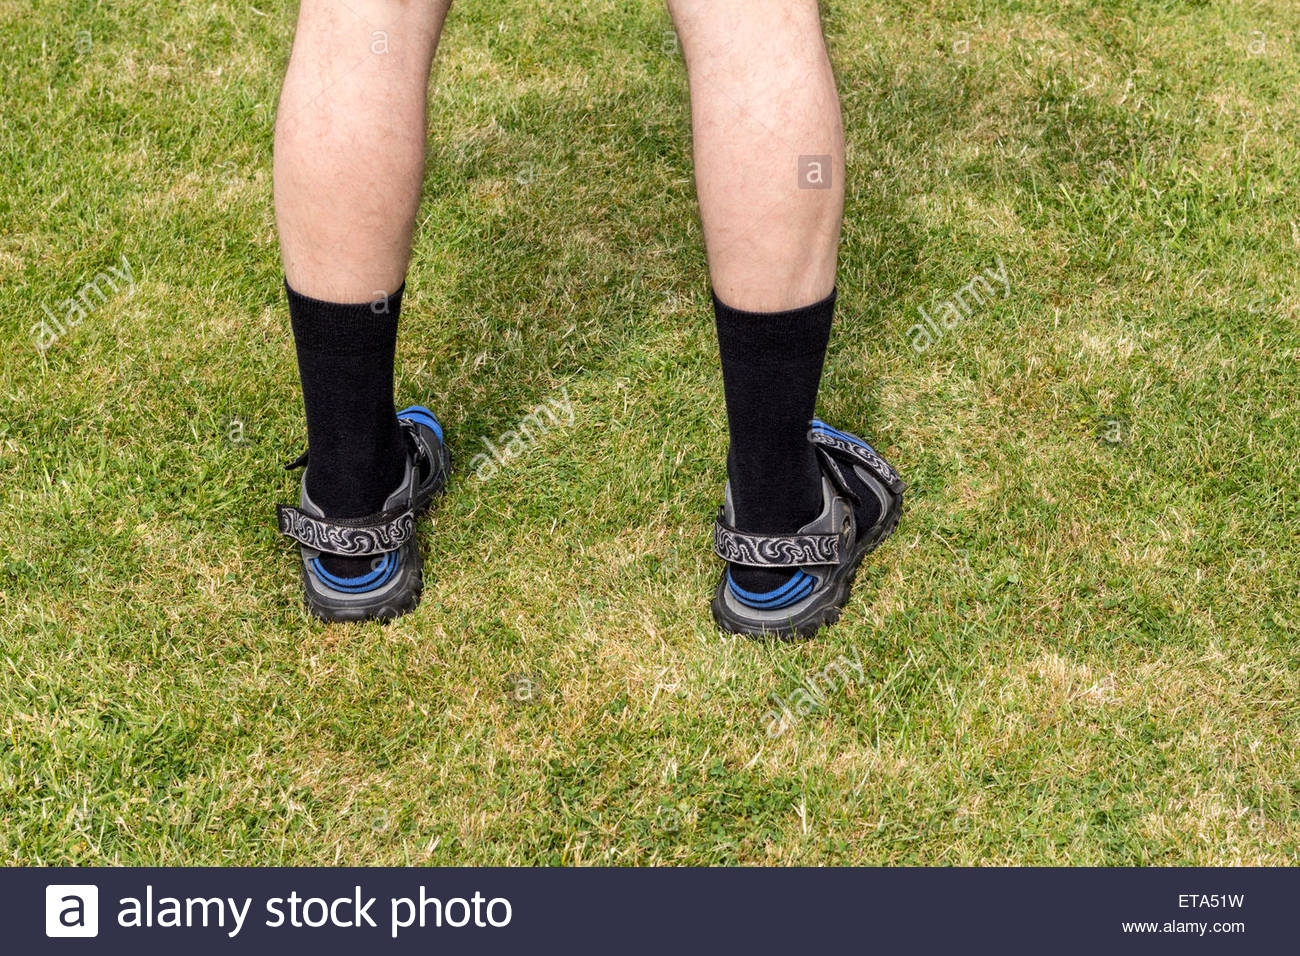 Socks With Sandals High Resolution Stock Photography and Images - Alamy